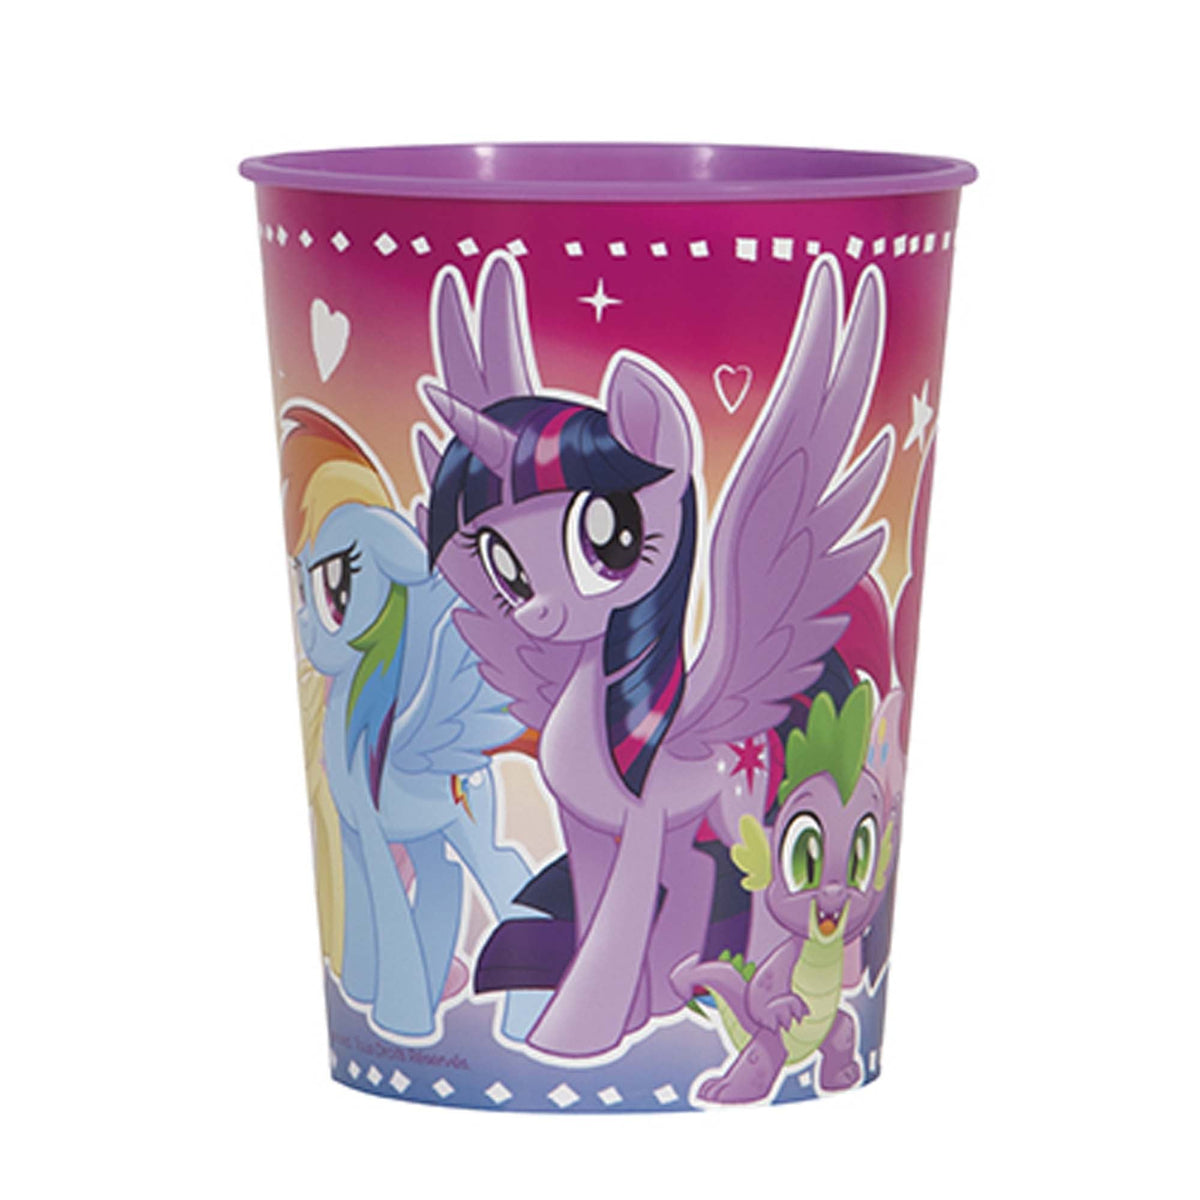 UNIQUE PARTY FAVORS Kids Birthday My Little Pony Birthday Party Favour Cup, 16 Oz, 1 Count